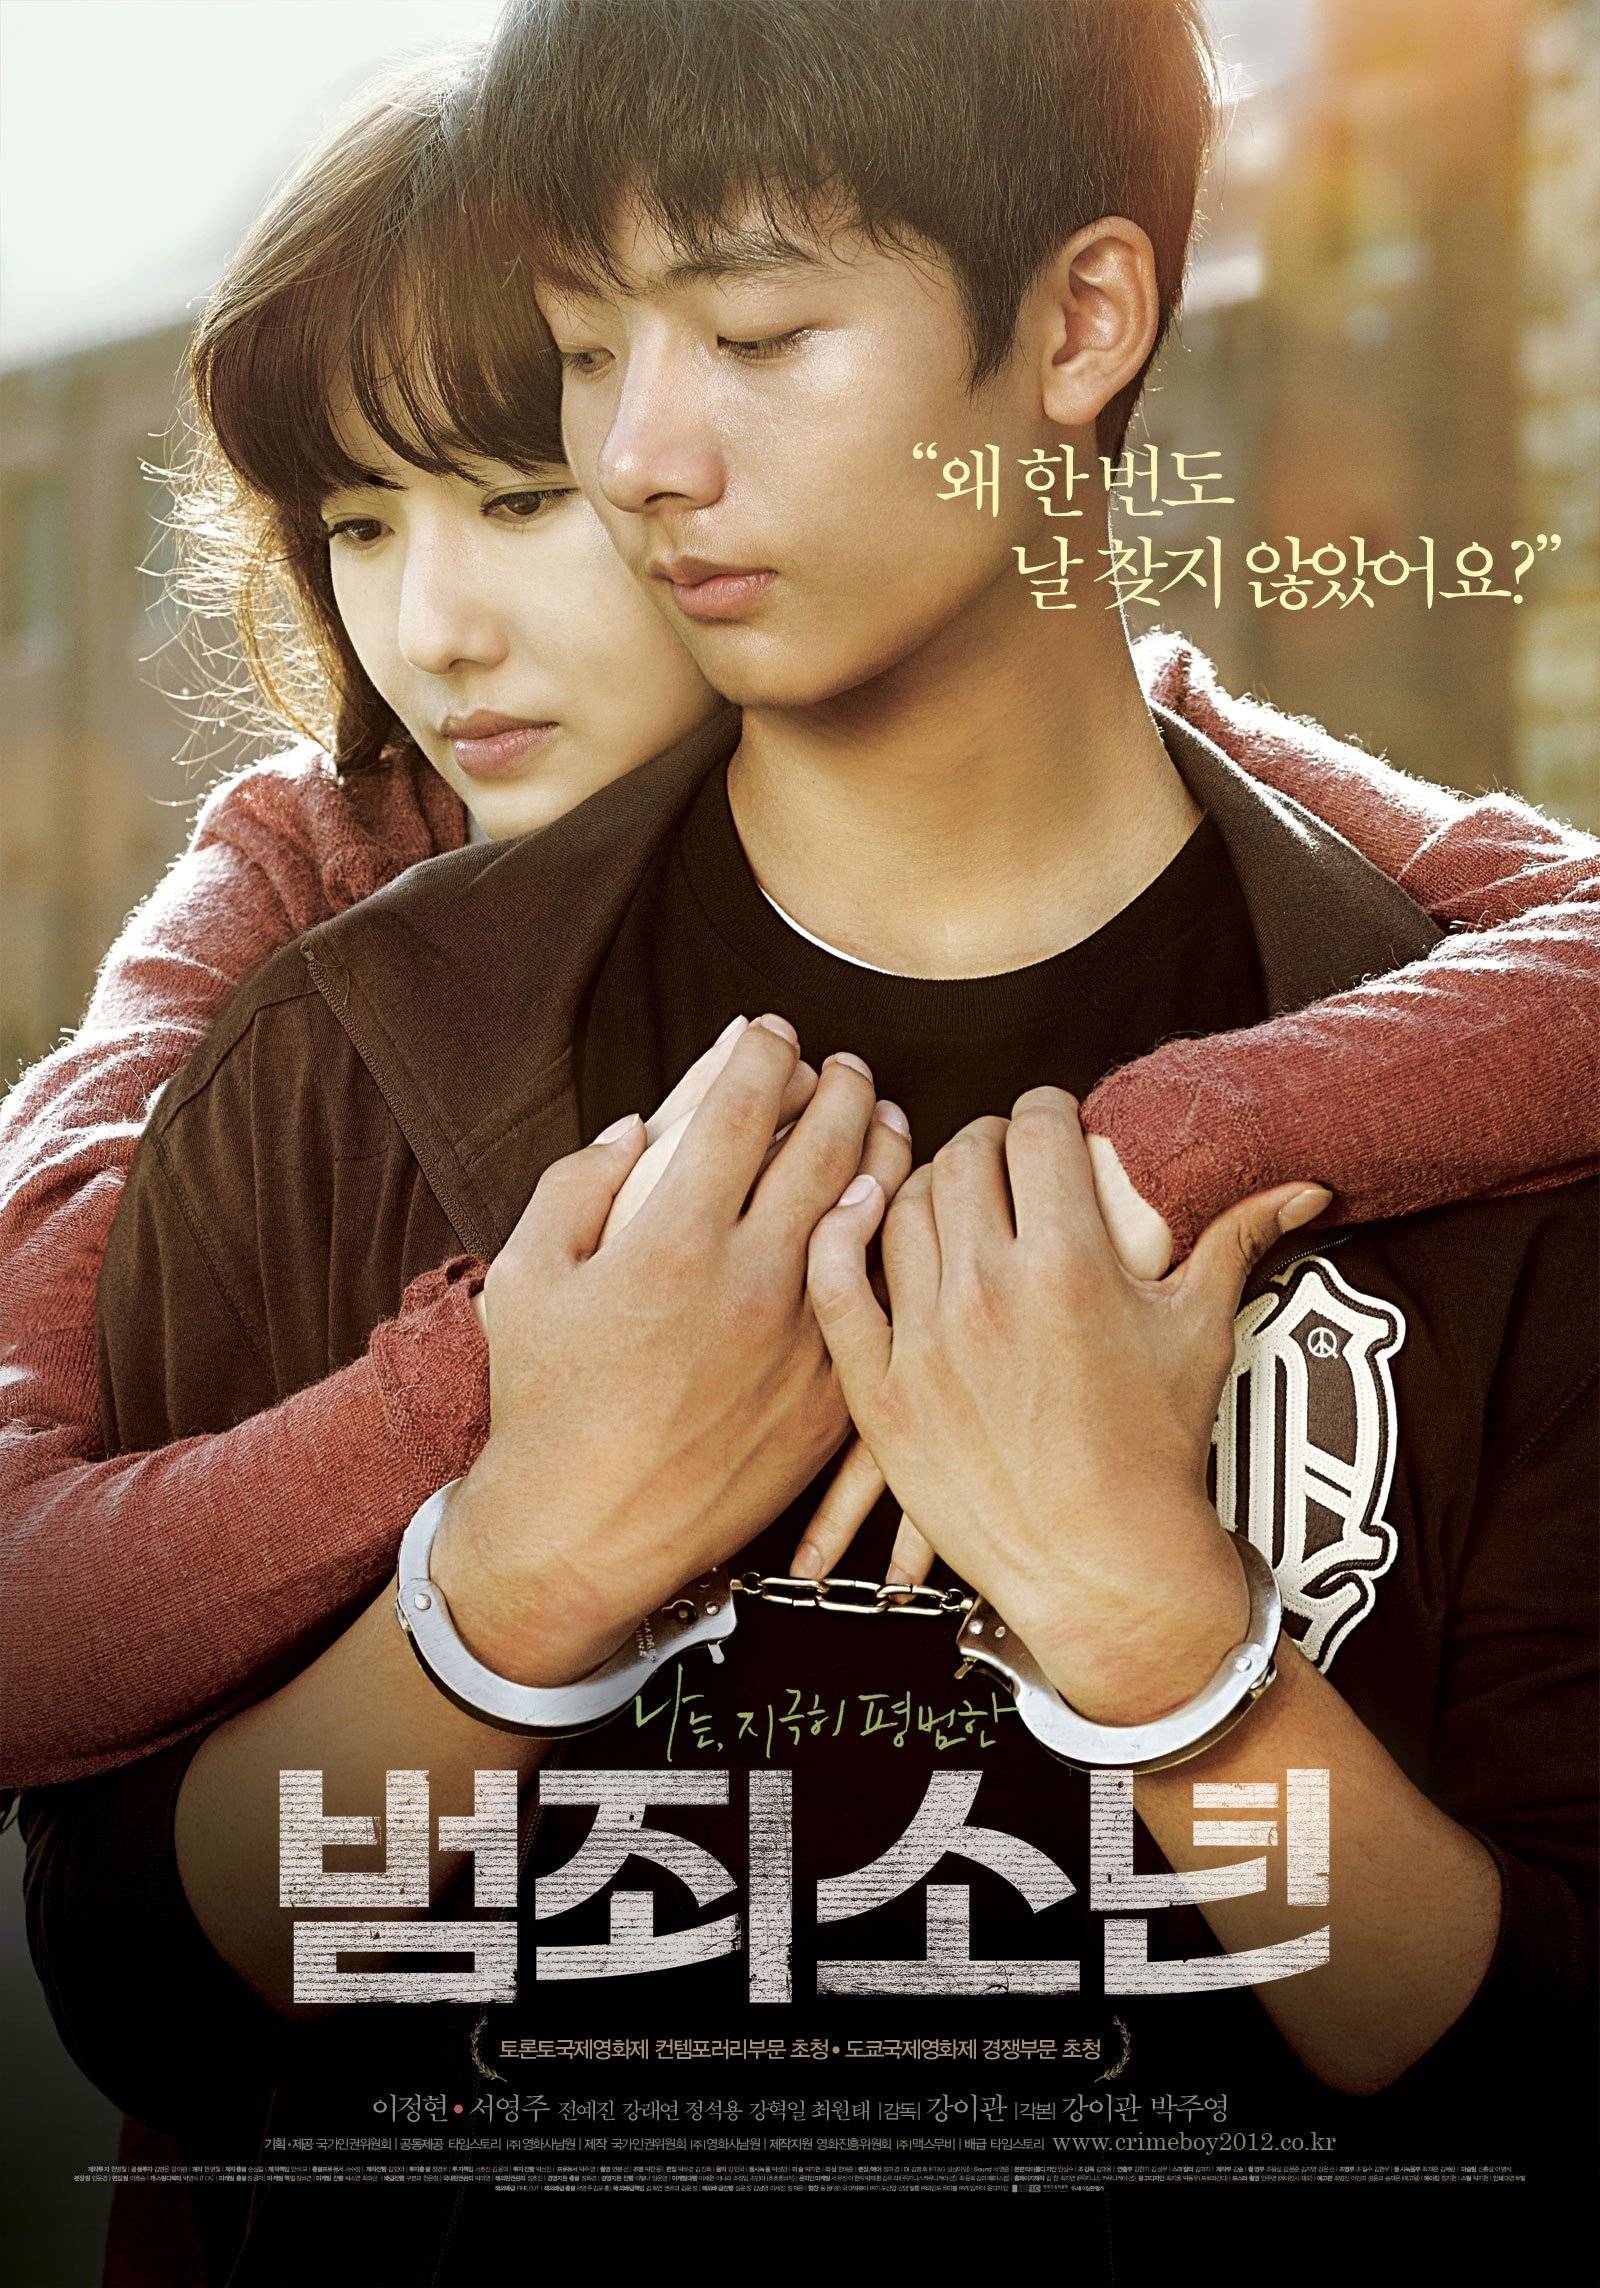 Added new poster for the upcoming Korean movie quot;Juvenile Offenderquot; @ HanCinema :: The Korean 